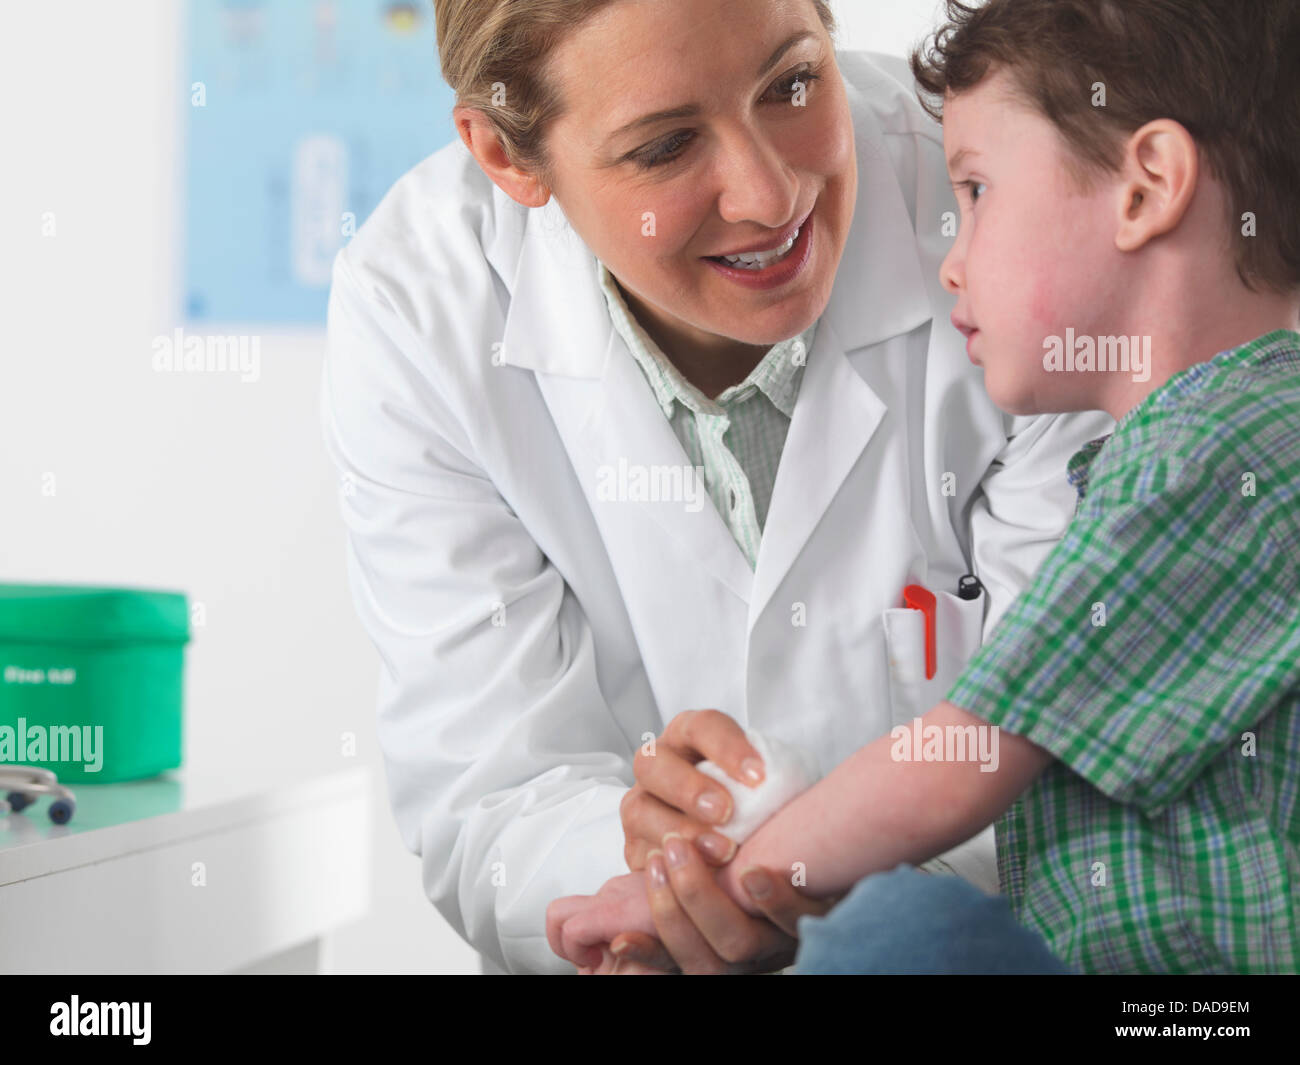 Doctor caring for small boy with injury Stock Photo